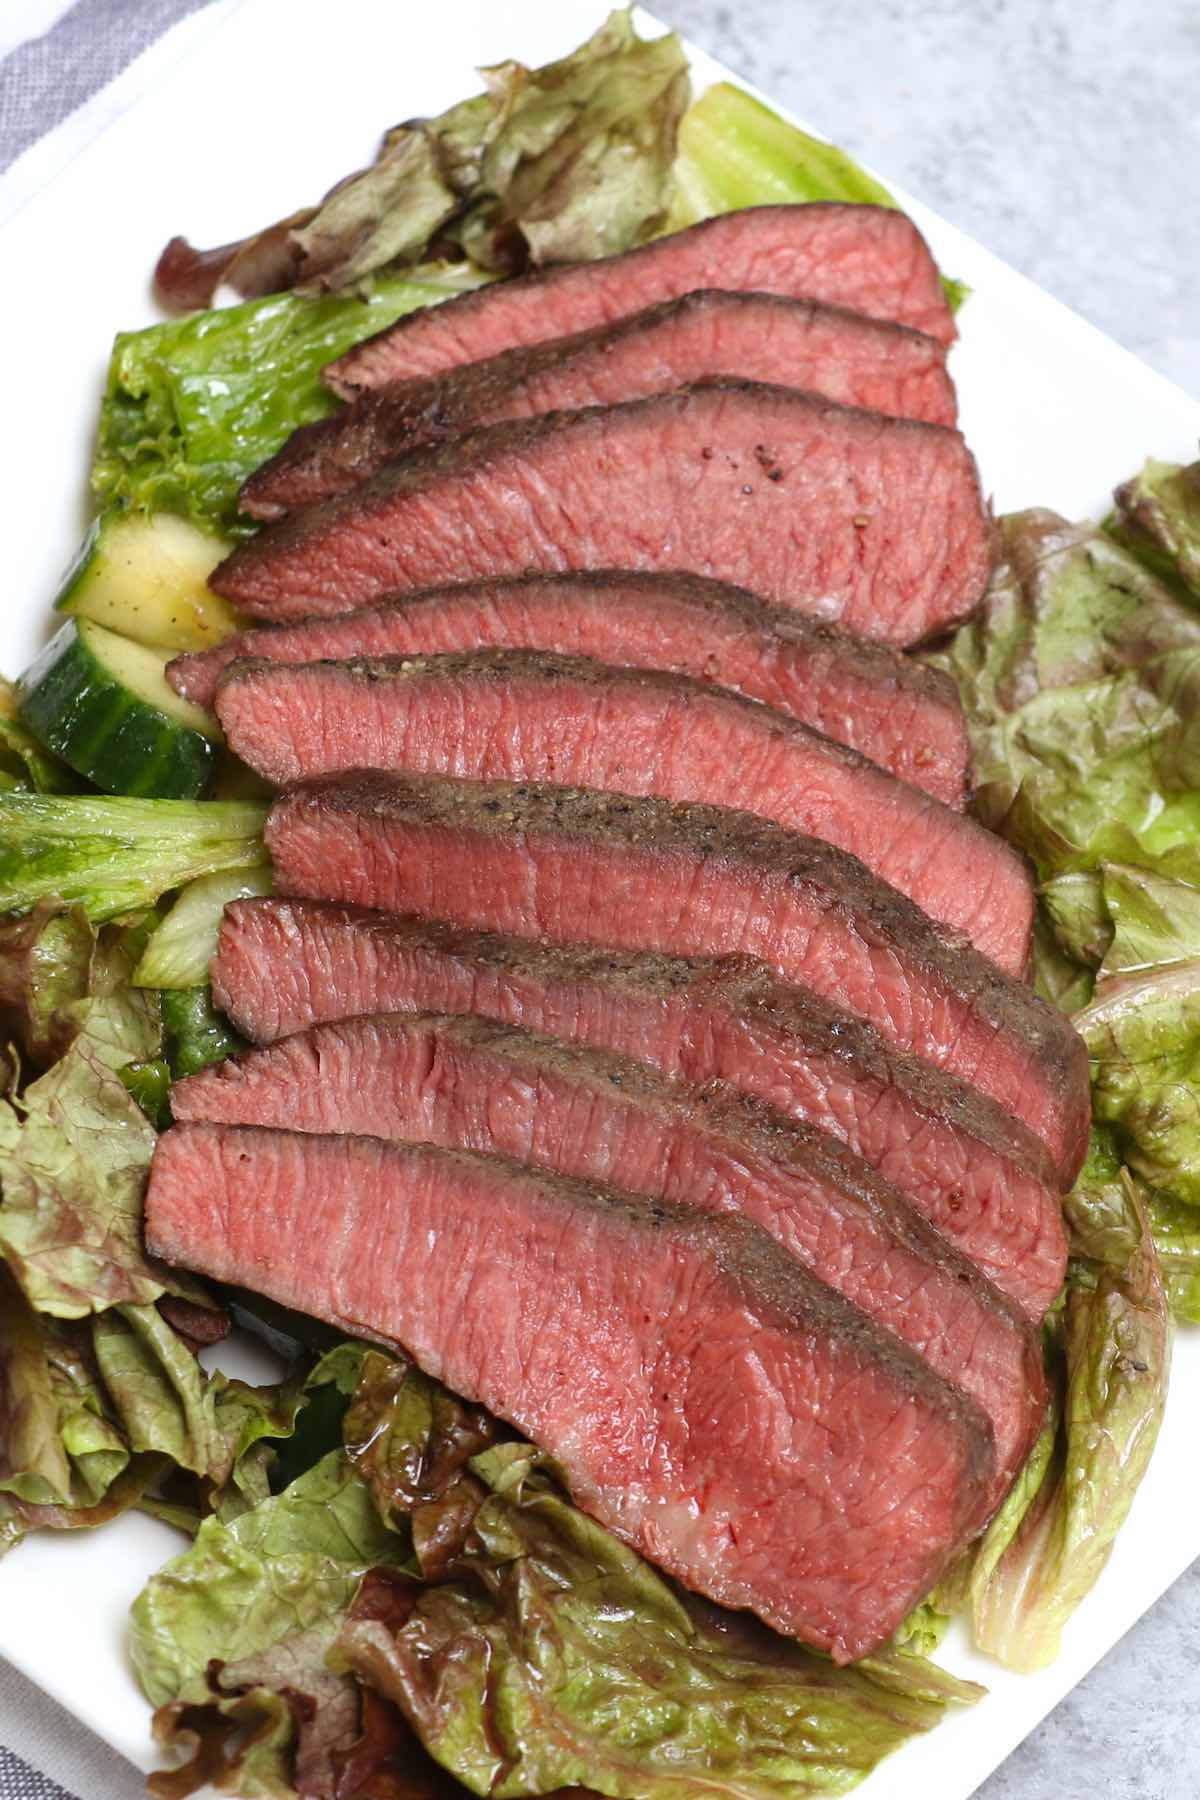 Slices of pan seared flat iron steak with a side salad